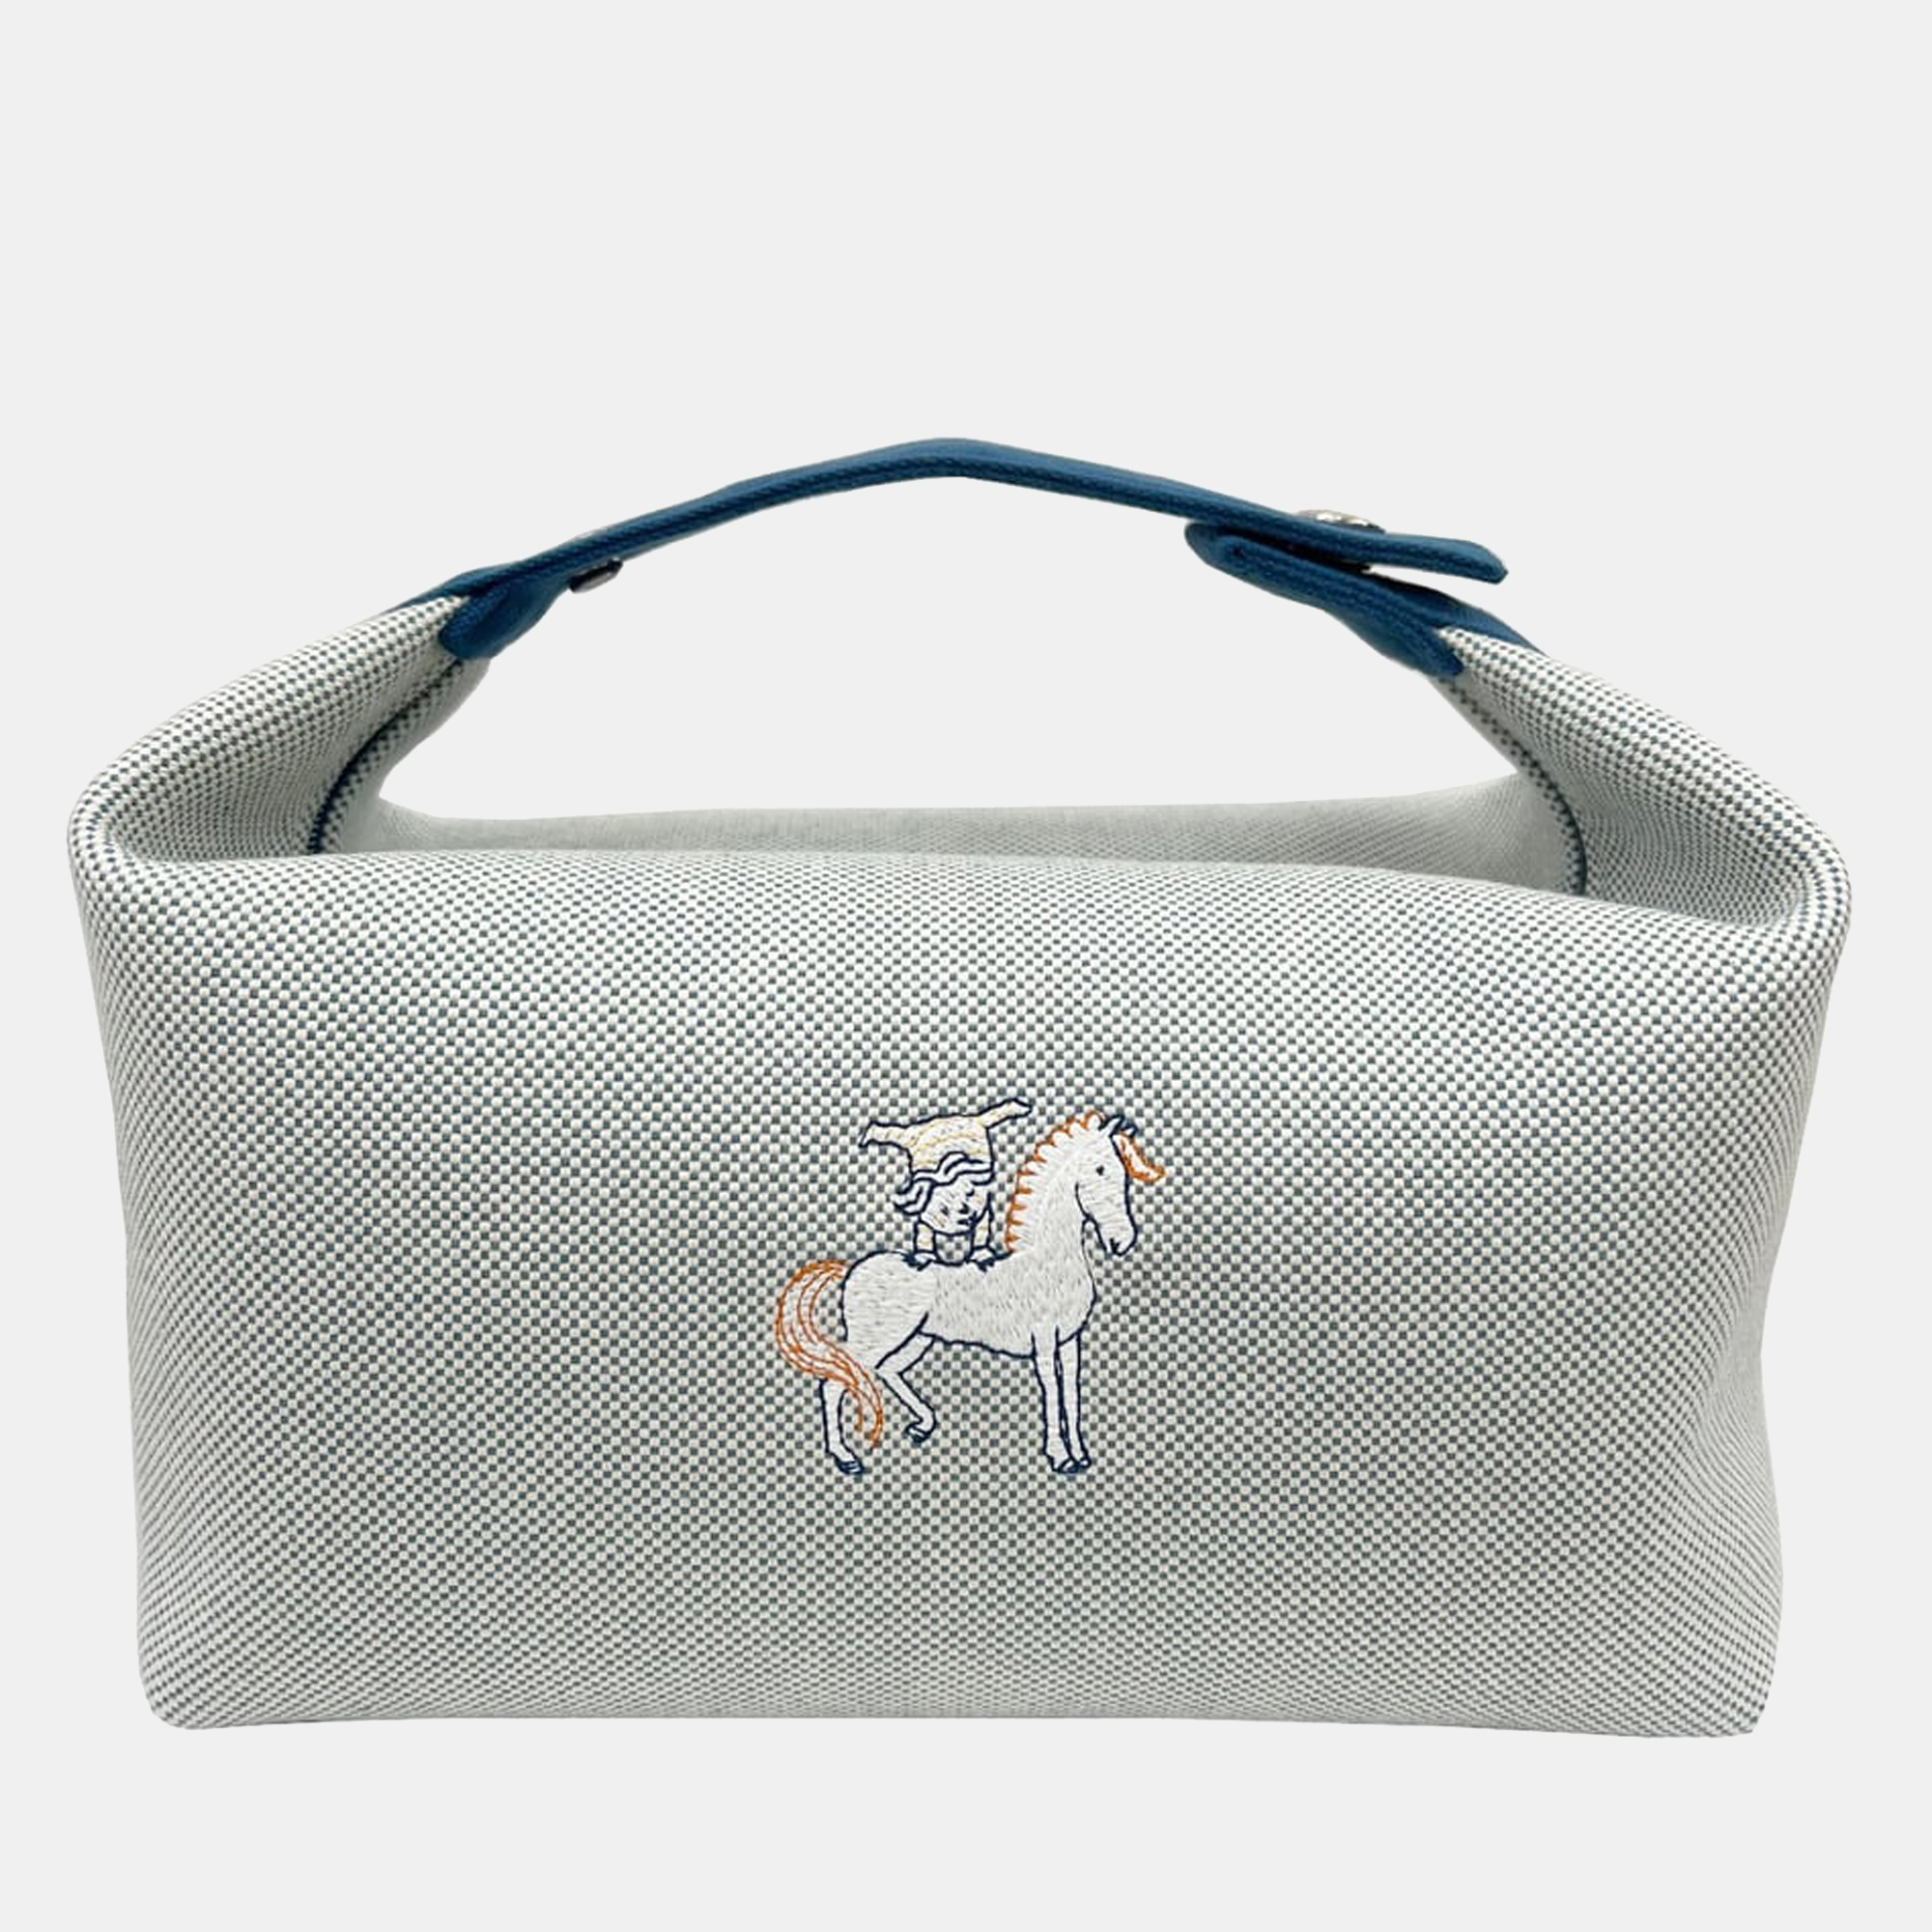 Hermes Brid A Blue GM Cabriole Vanity Super Rare Mini Bag Lightweight Embroidery Horse Baby New